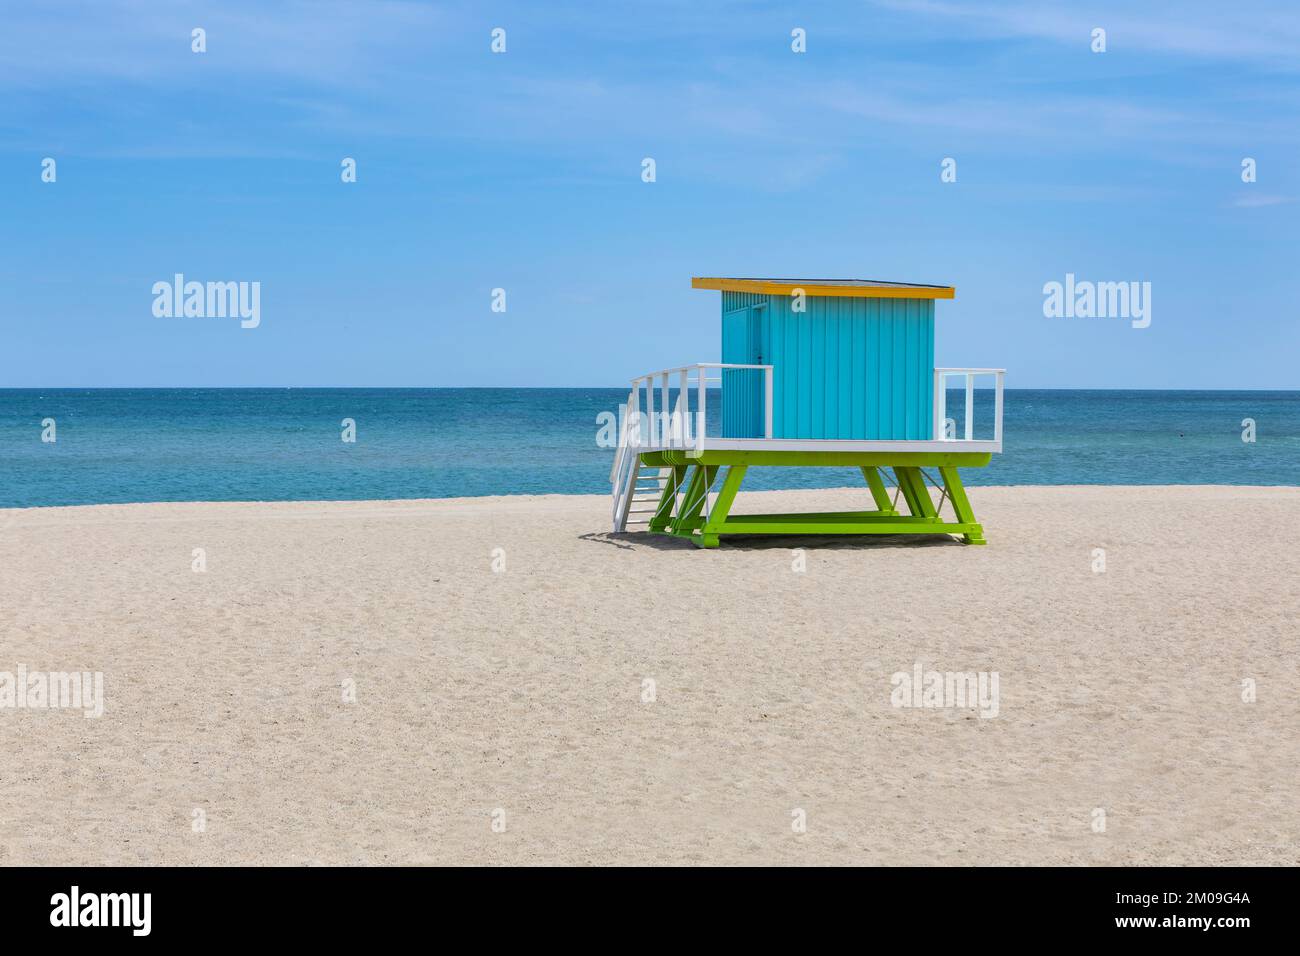 A Lifeguard station on Le Barcares beach, South of France. Stock Photo